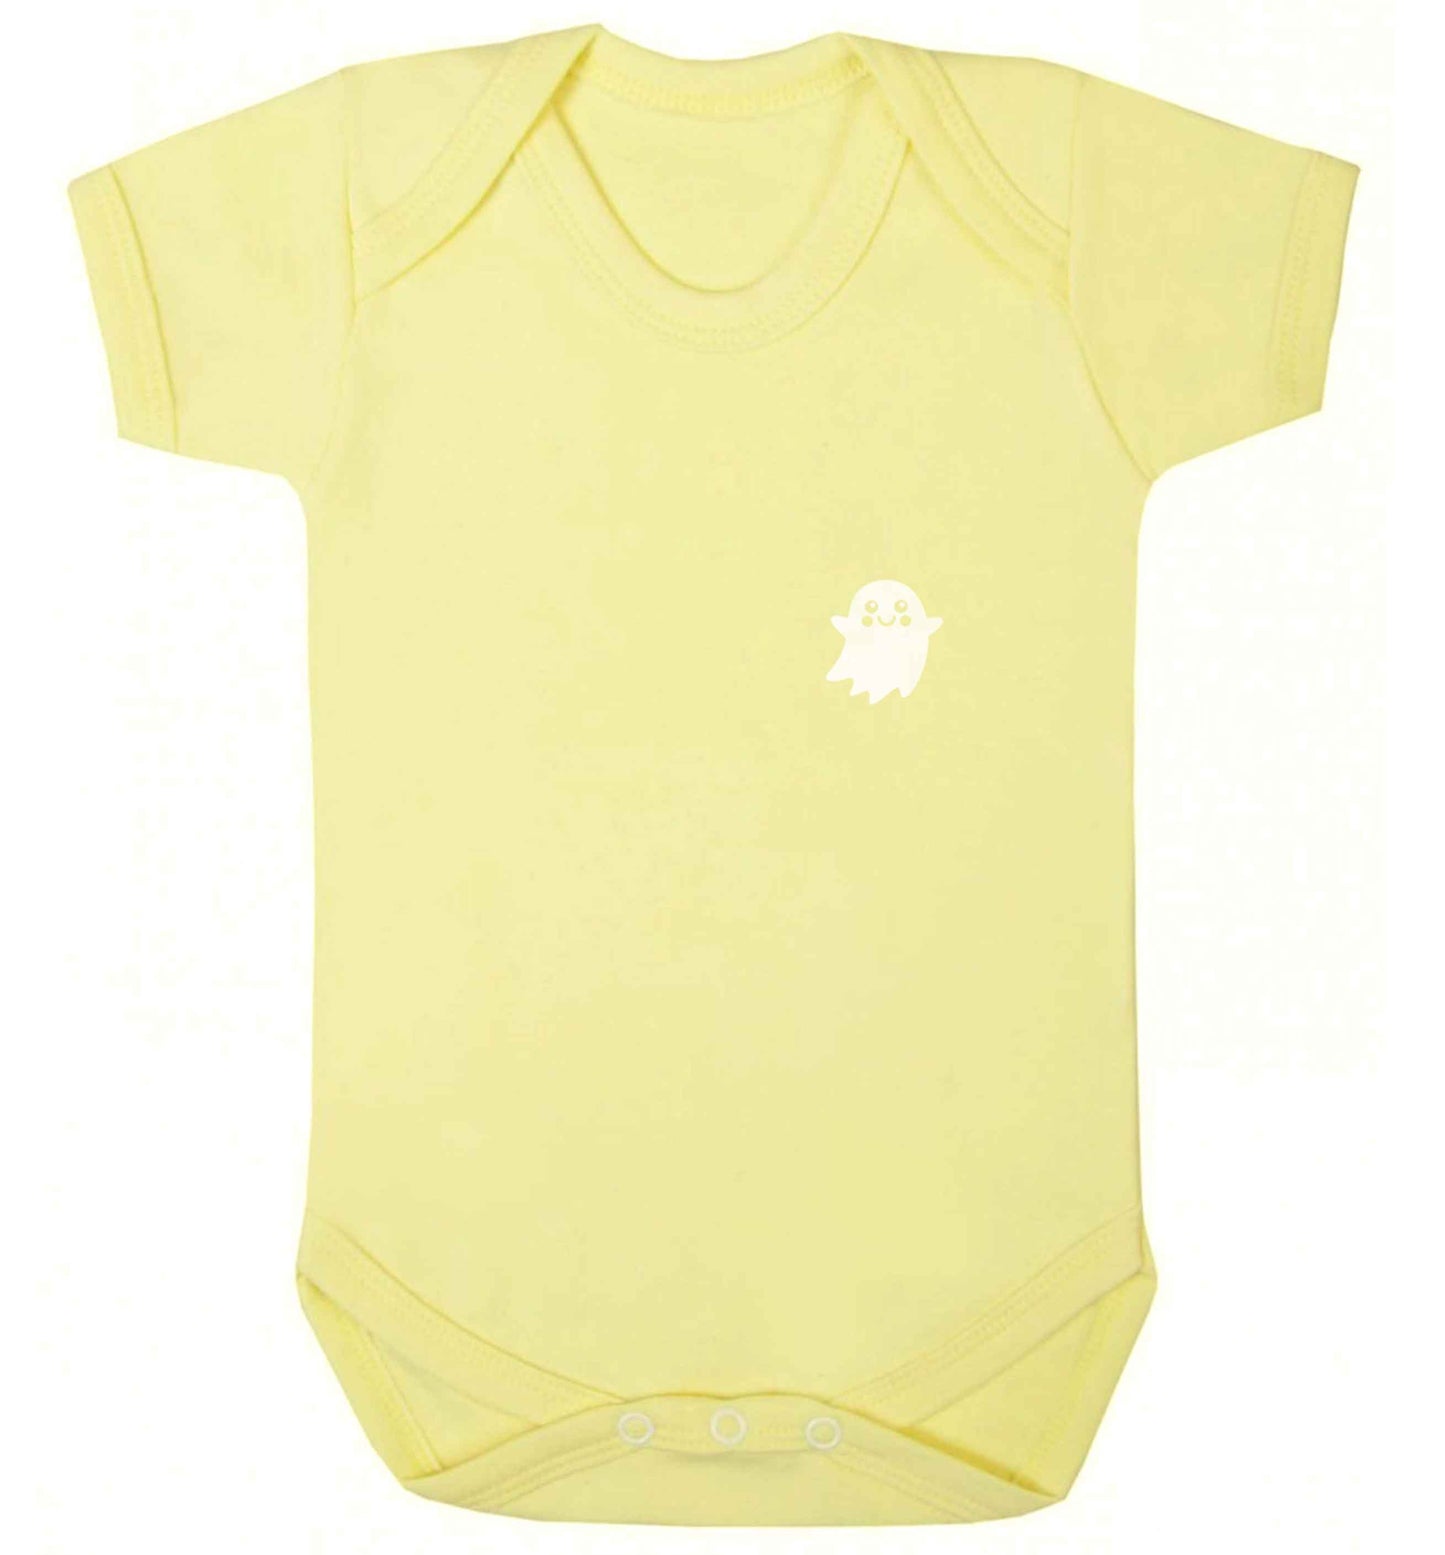 Pocket ghost baby vest pale yellow 18-24 months